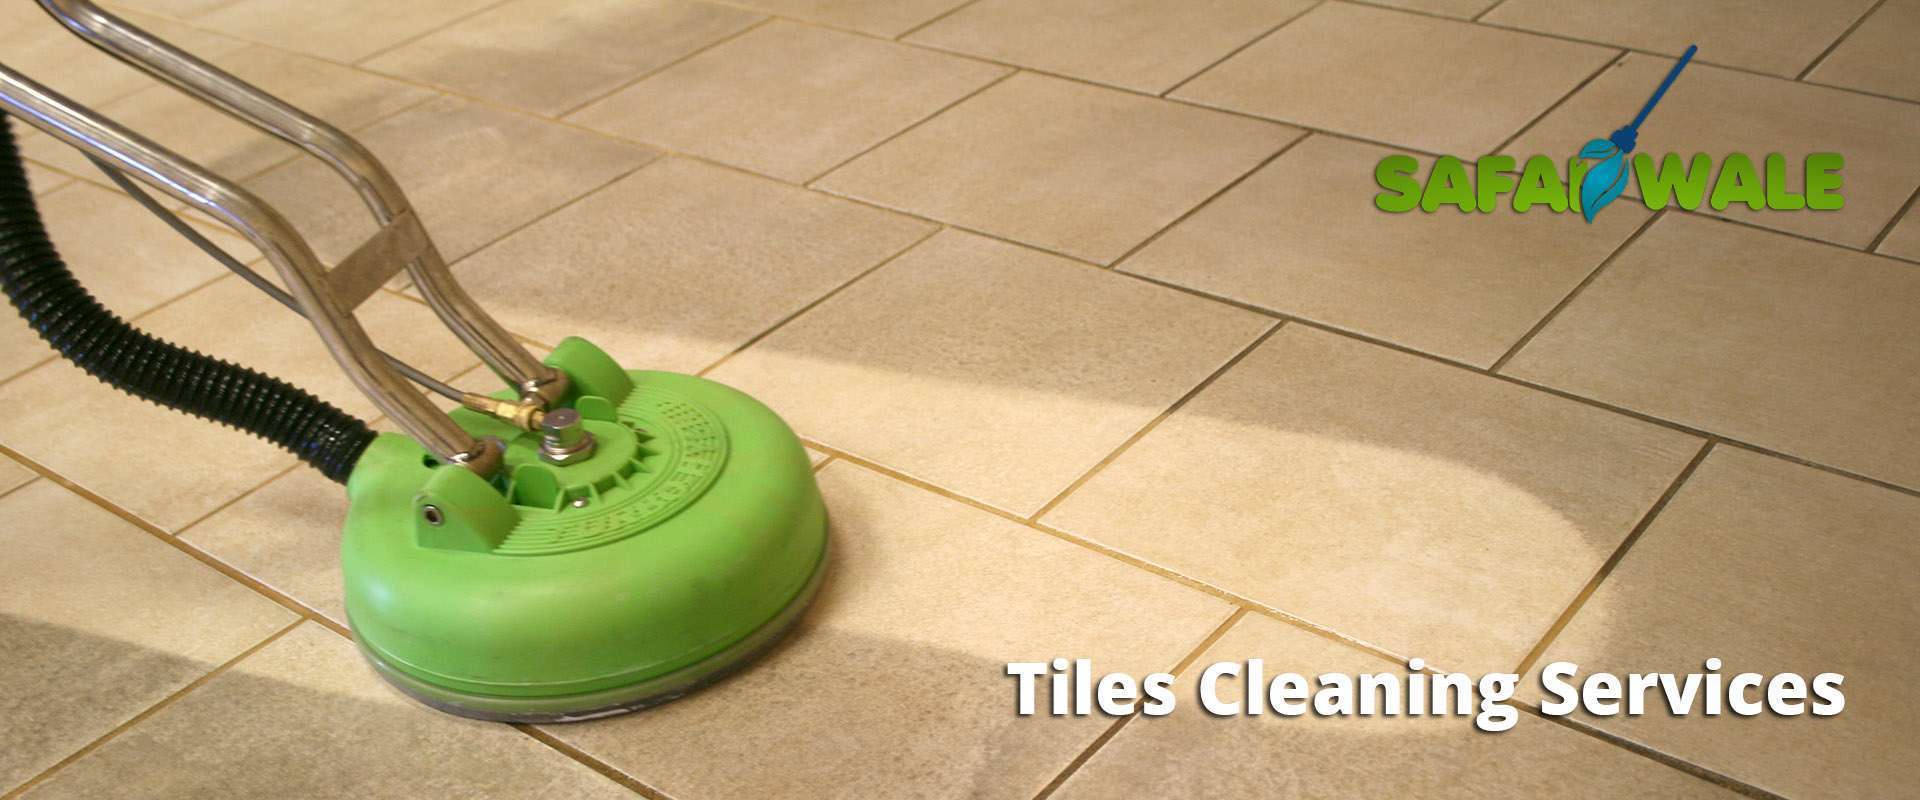 Tiles Cleaning Services In Visakhapatnam